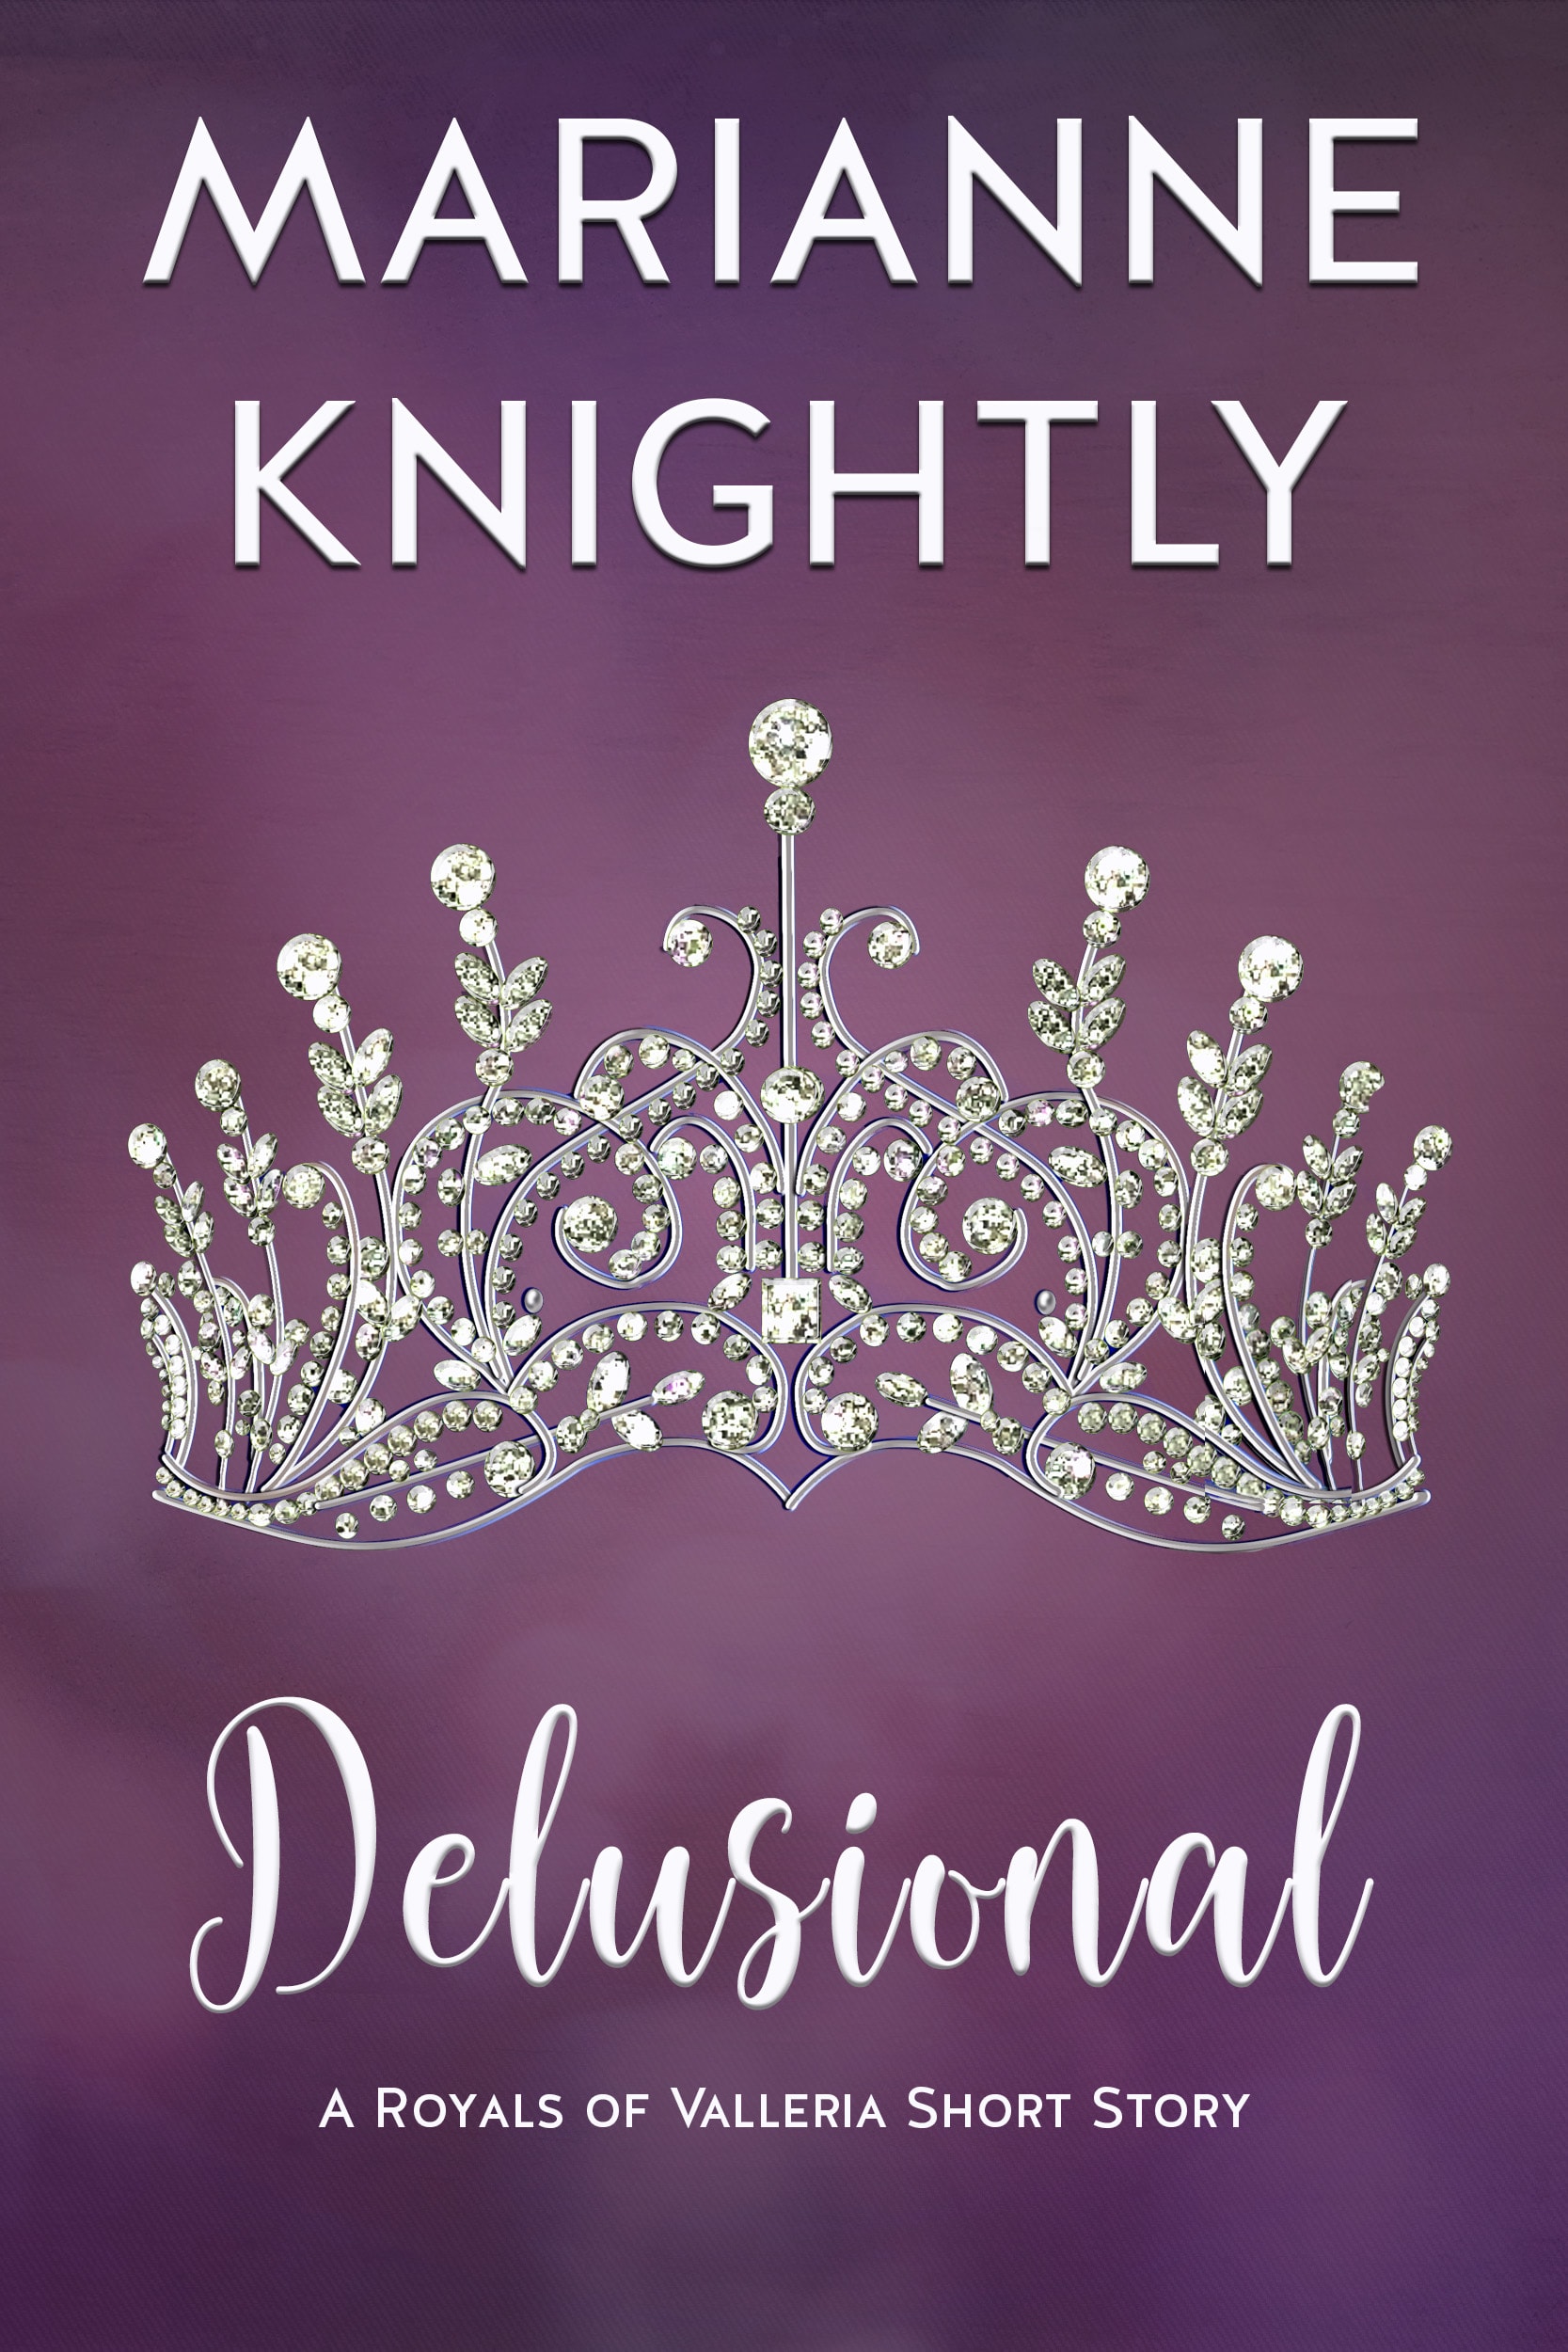 Delusional, A Royals of Valleria Short Story by Marianne Knightly